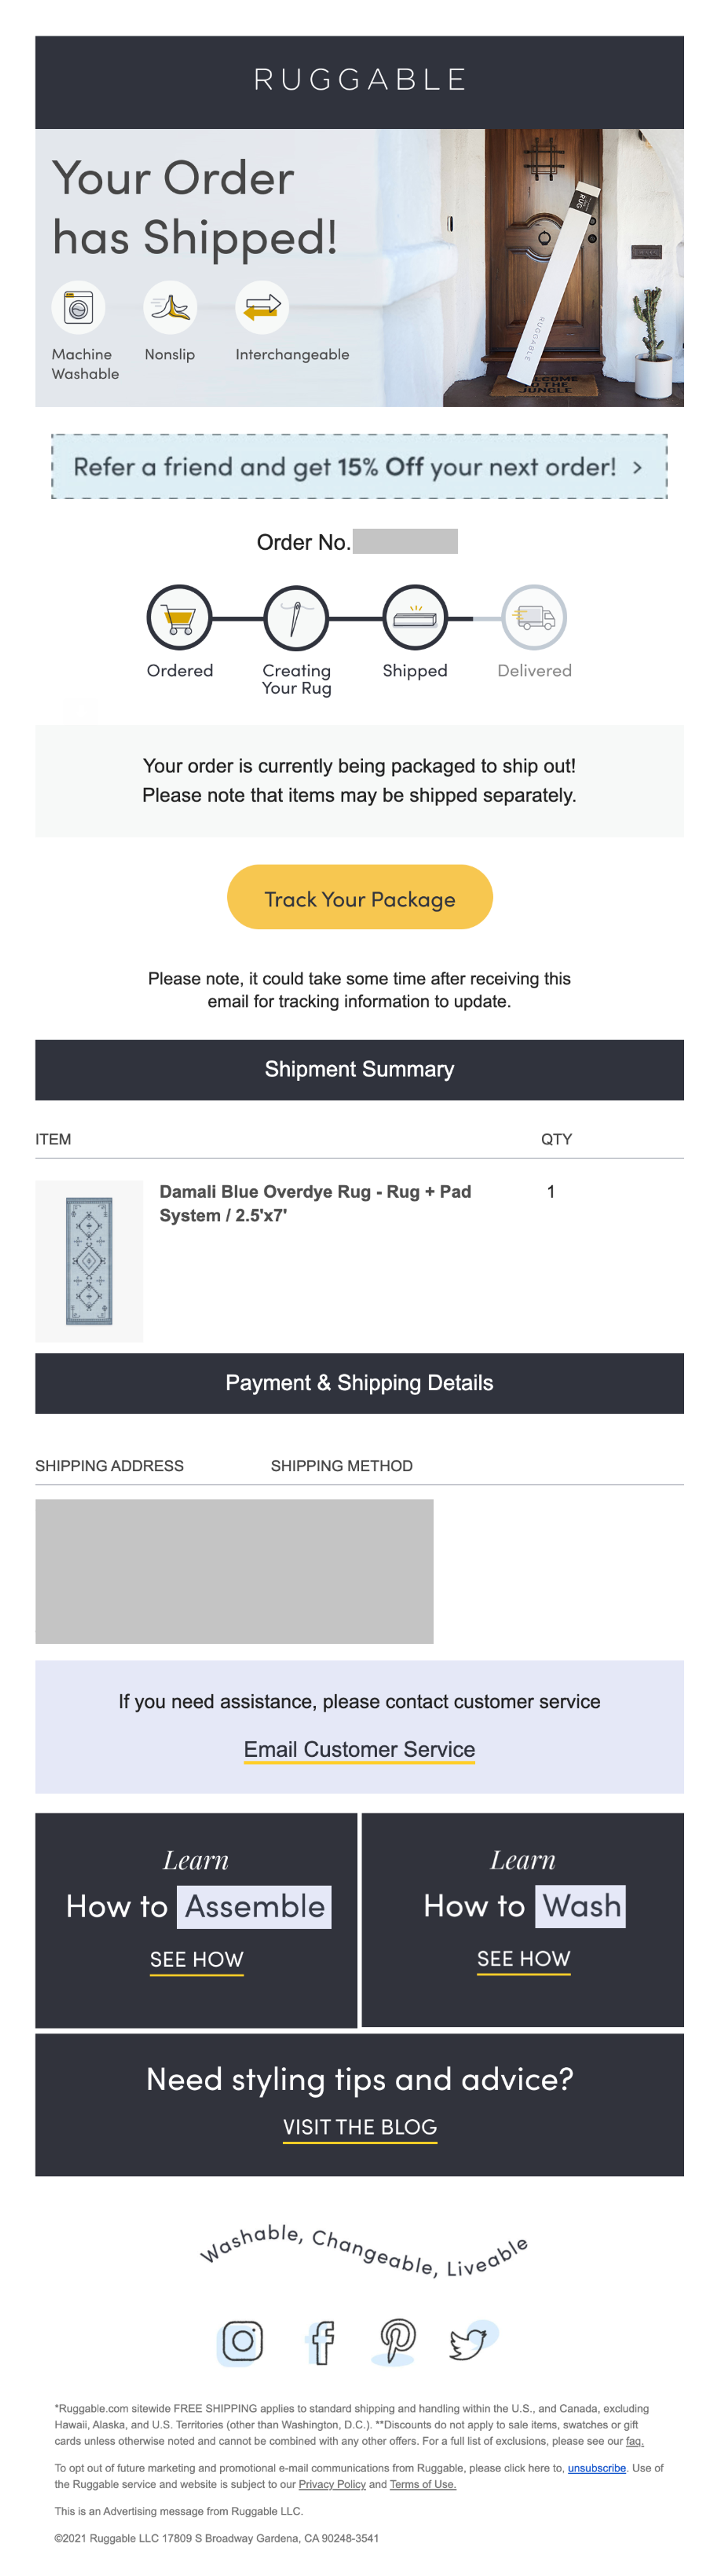 Ruggable Shipment Created Industry Email Template screenshot